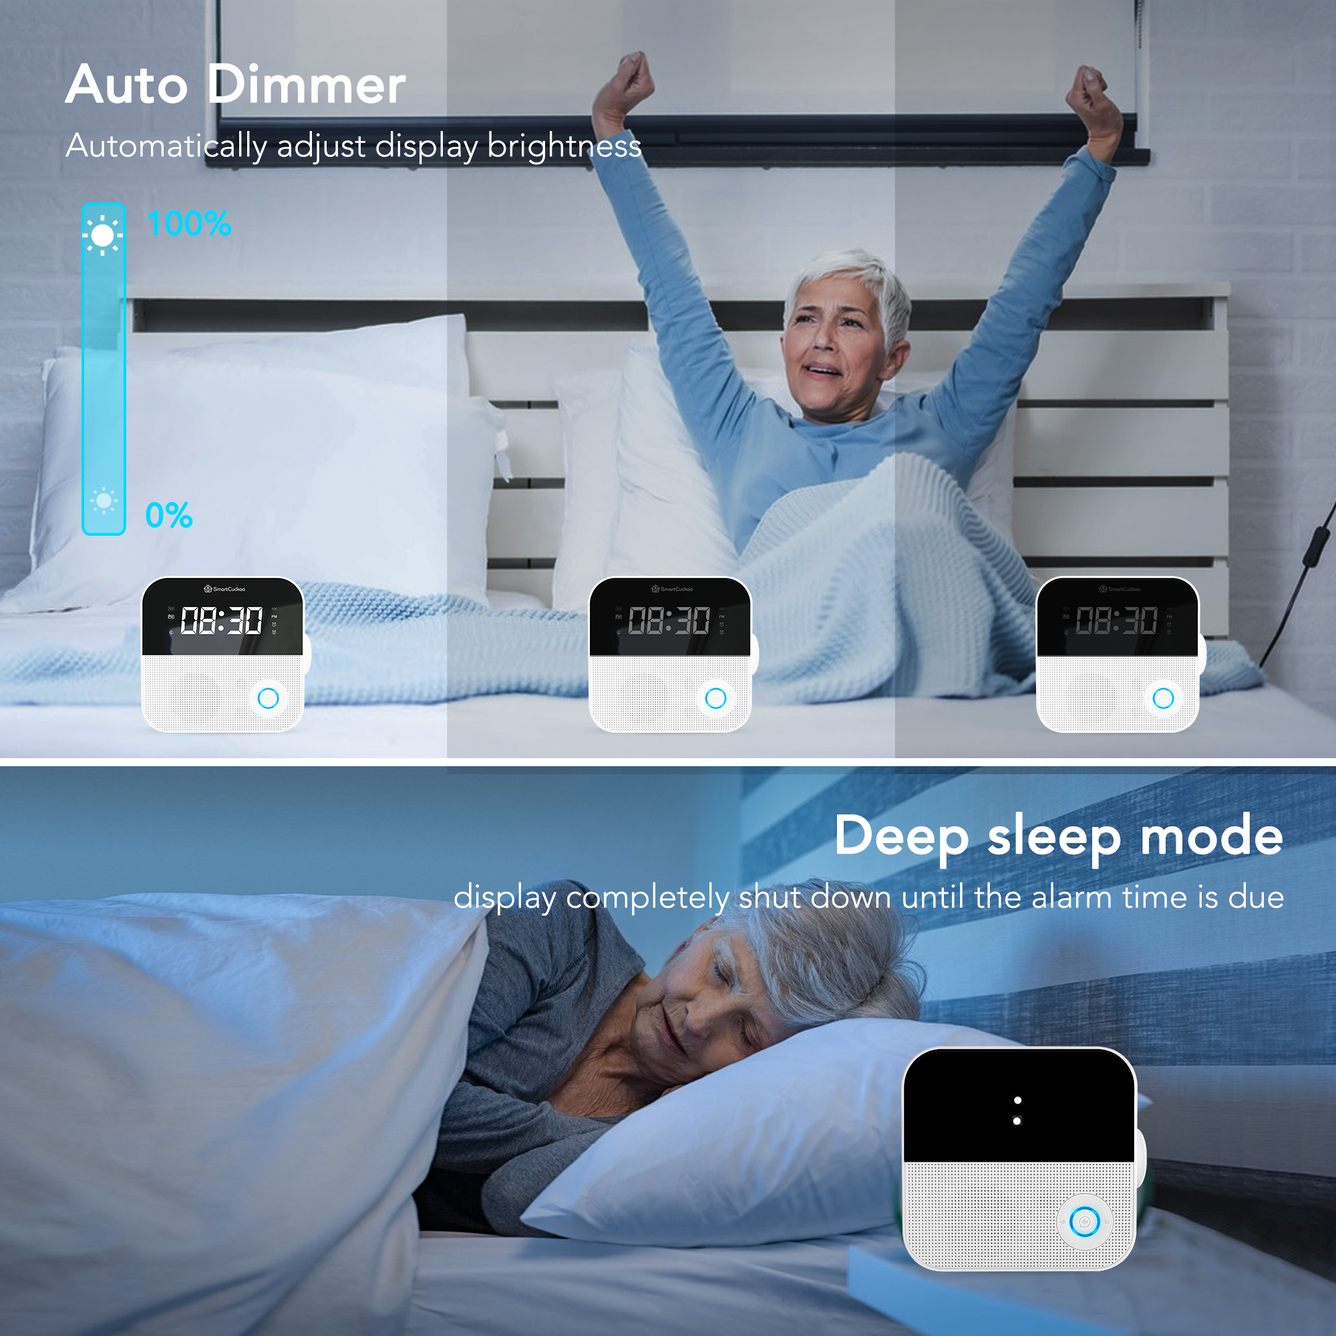 SMARTCUCKOO Smart Alarm Clock AM/FM Radio-  White Noise Temperature-humidity Sensor Personal Voice Medication Reminder. iOS/Android App, remote control and WIFI enabled!